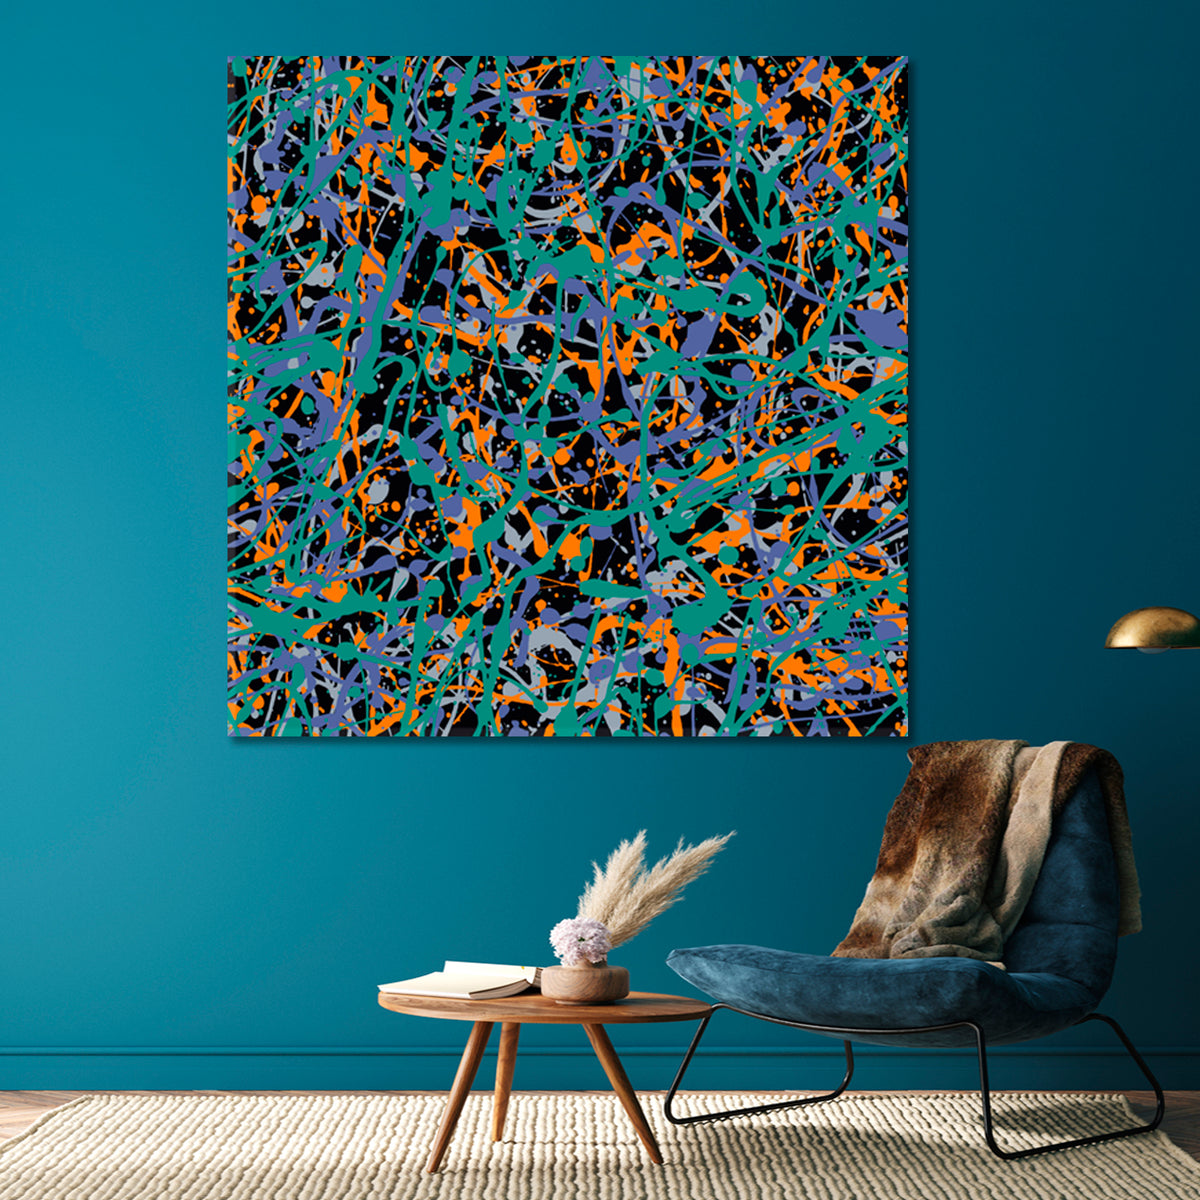 Pollock's Style Abstract Turquoise Orange Violet Colors Abstract Art Print Artesty 1 Panel 12"x12" 